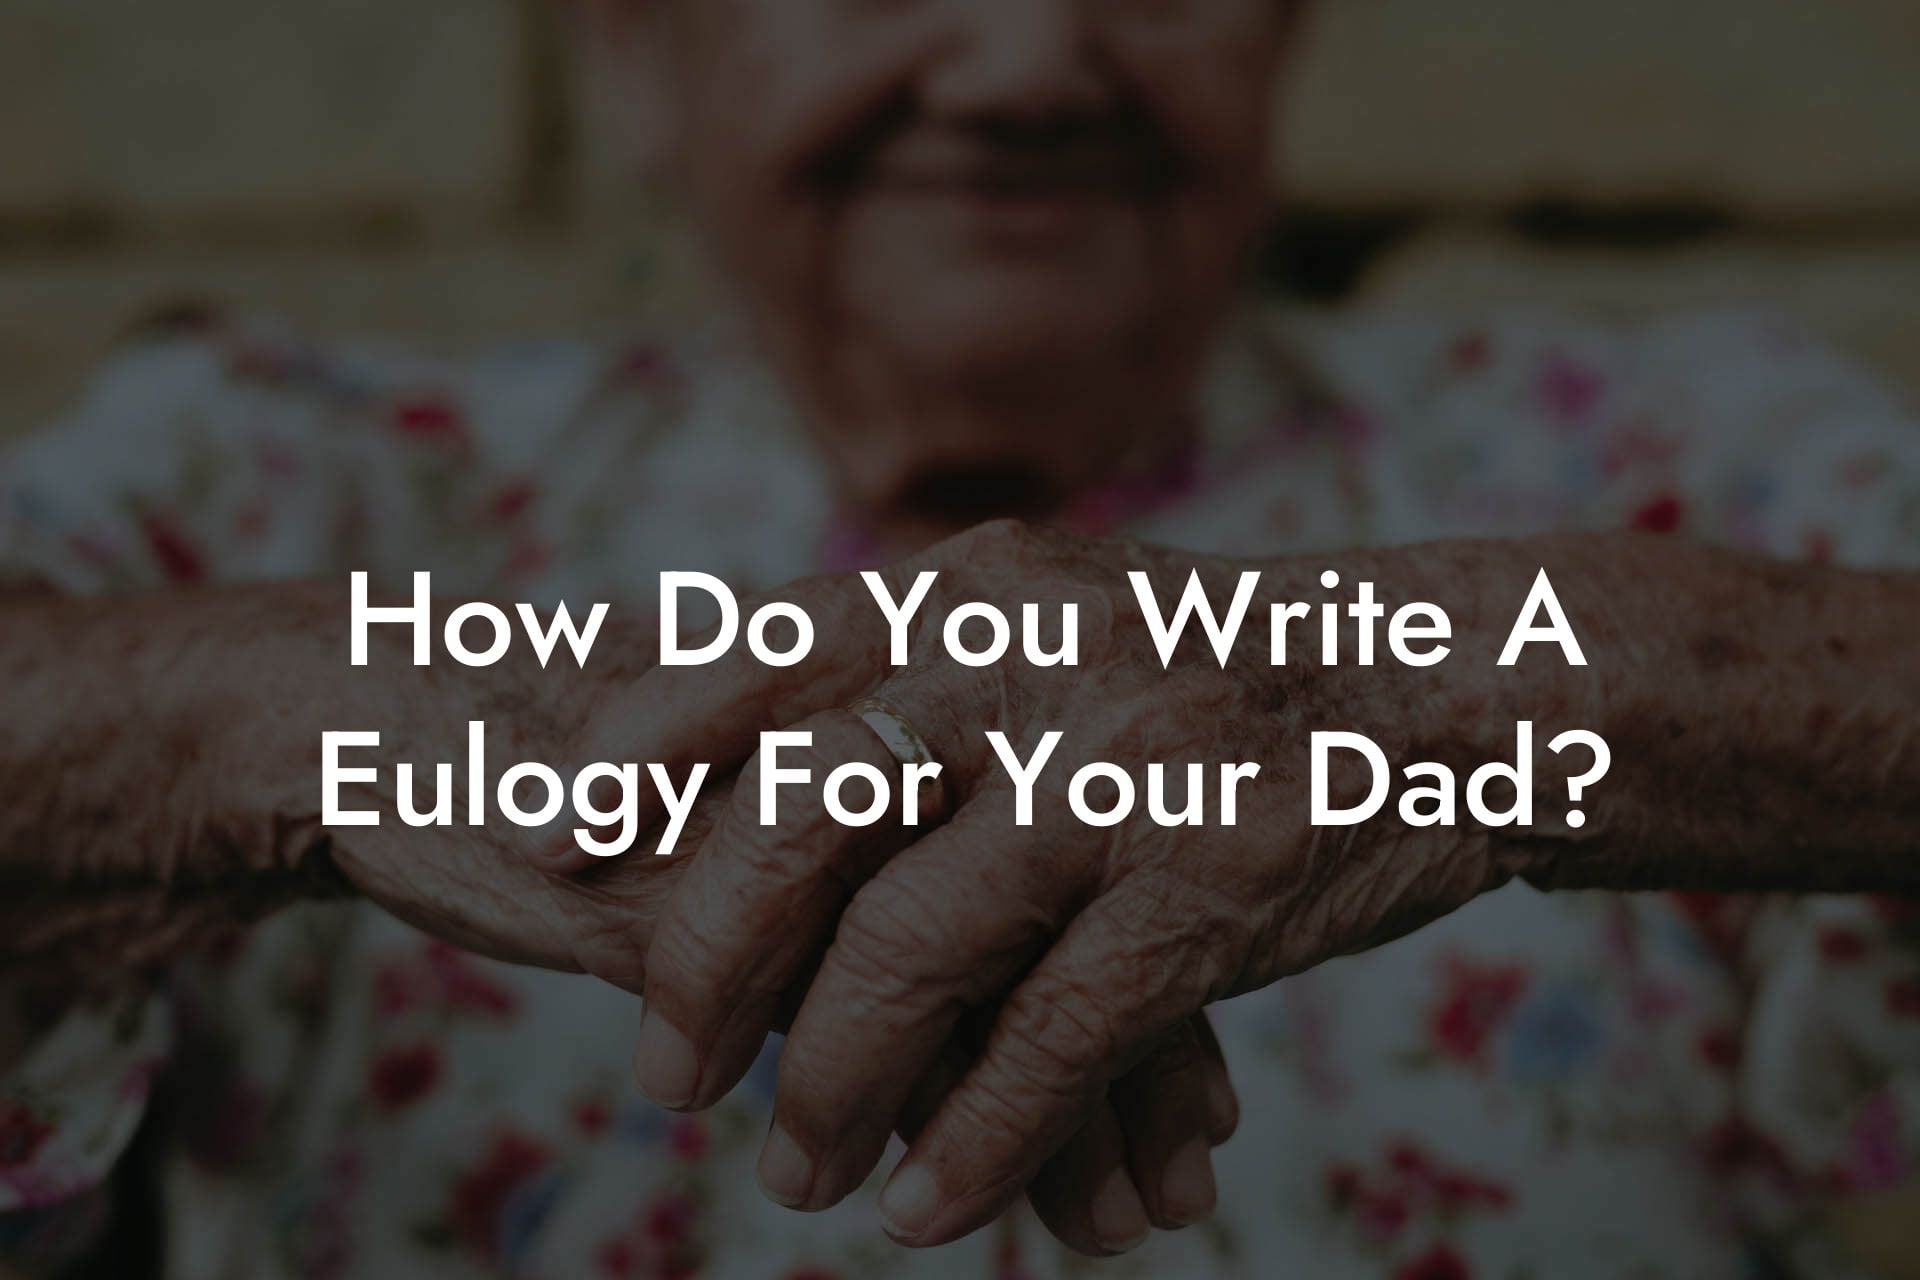 How Do You Write A Eulogy For Your Dad?